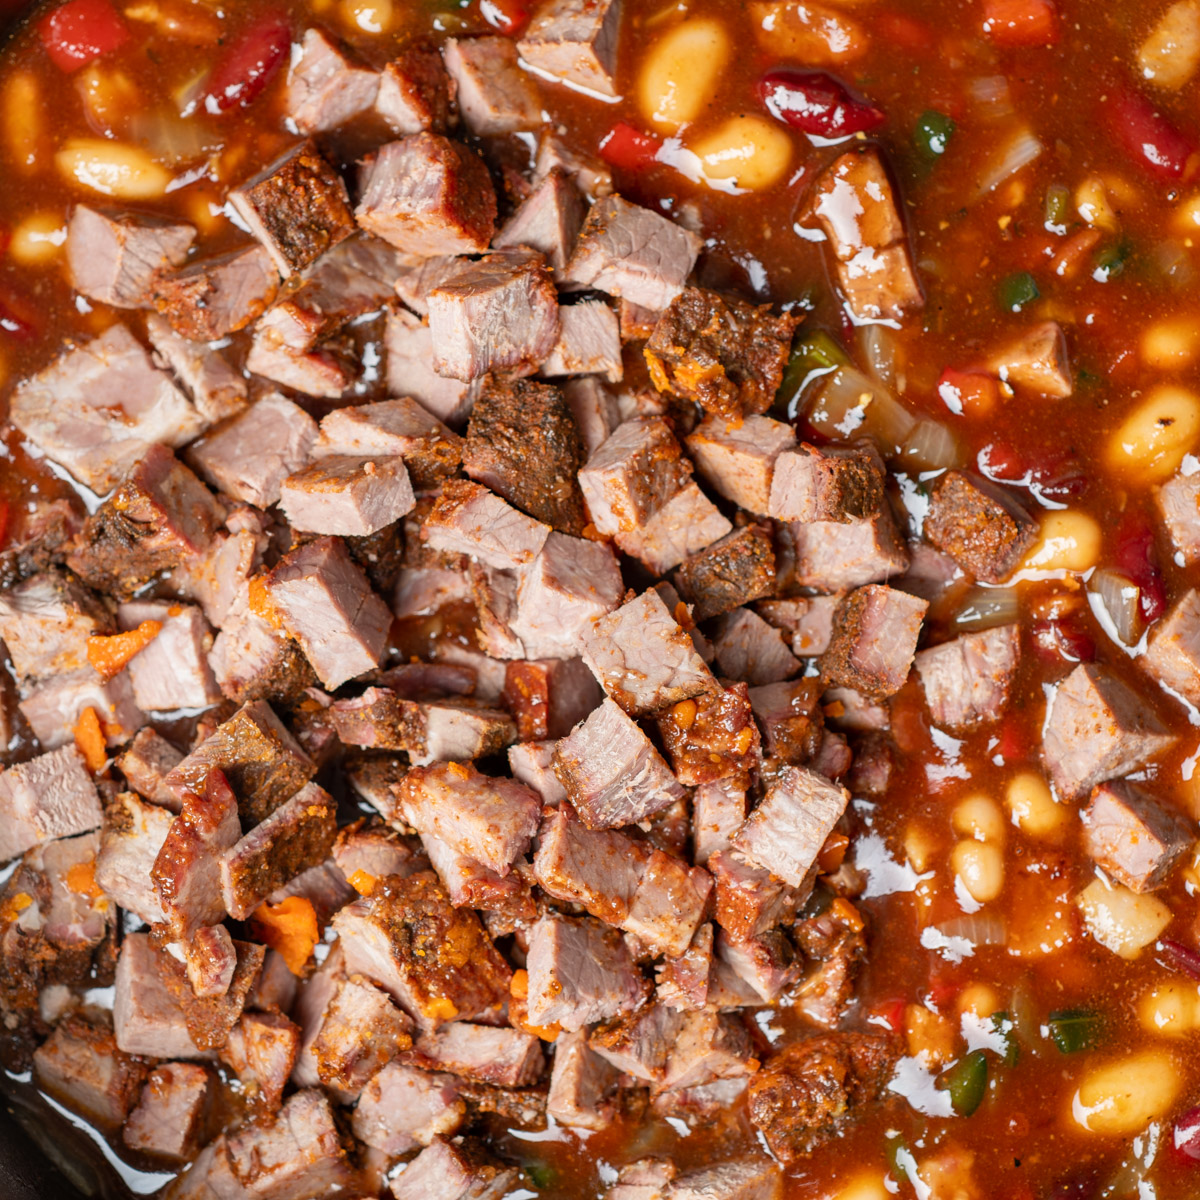 Add chopped brisket to the baked beans.